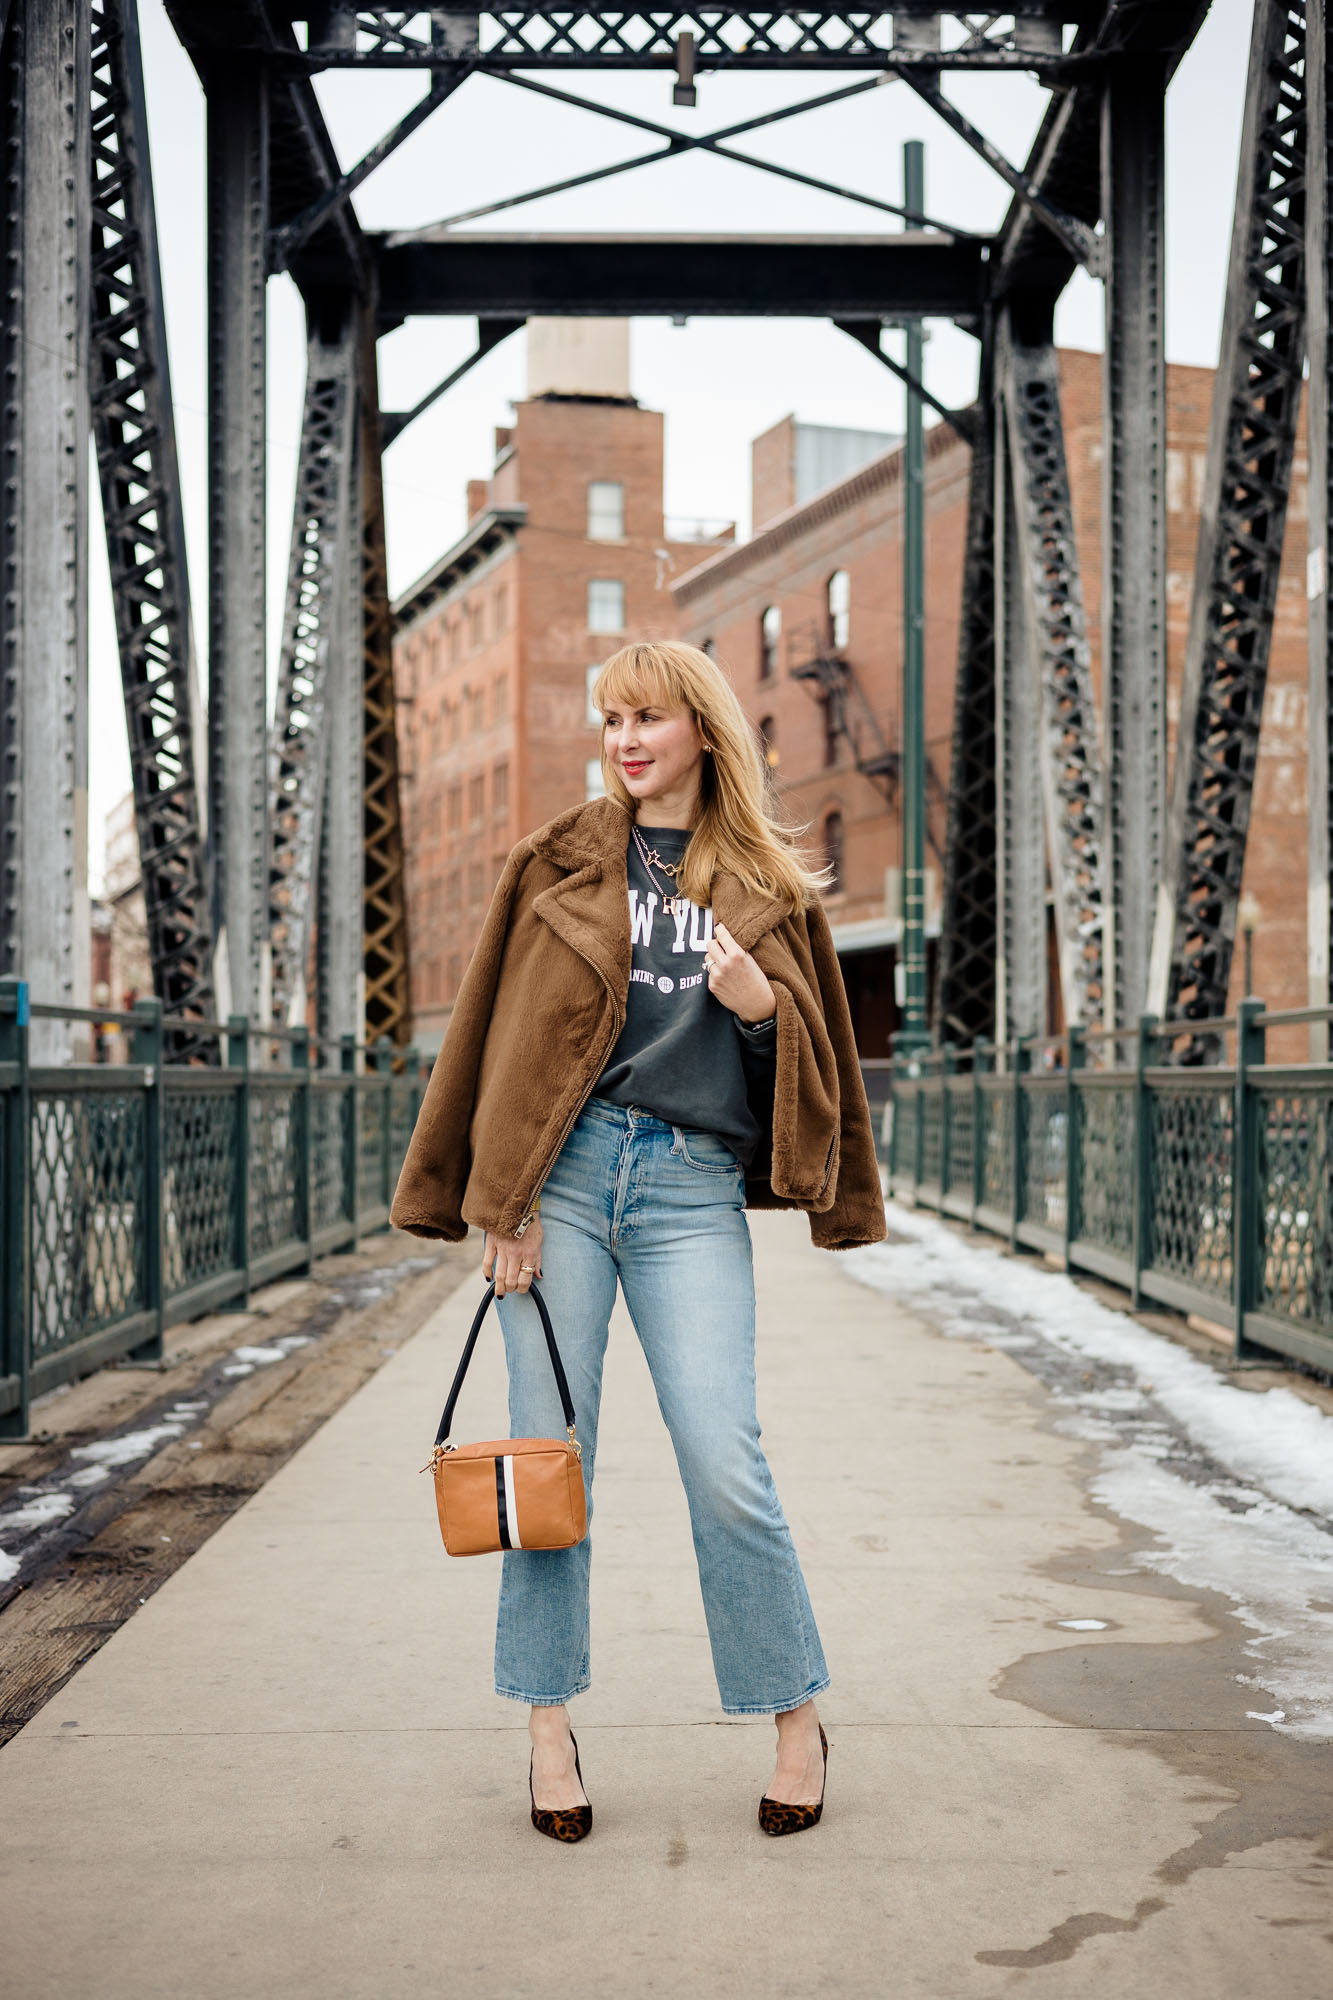 Wearing the Anine Bing New York sweatshirt with a Vince faux fur, Mother jeans, leopard L'agence pumps and a Clare V crossbody bag.